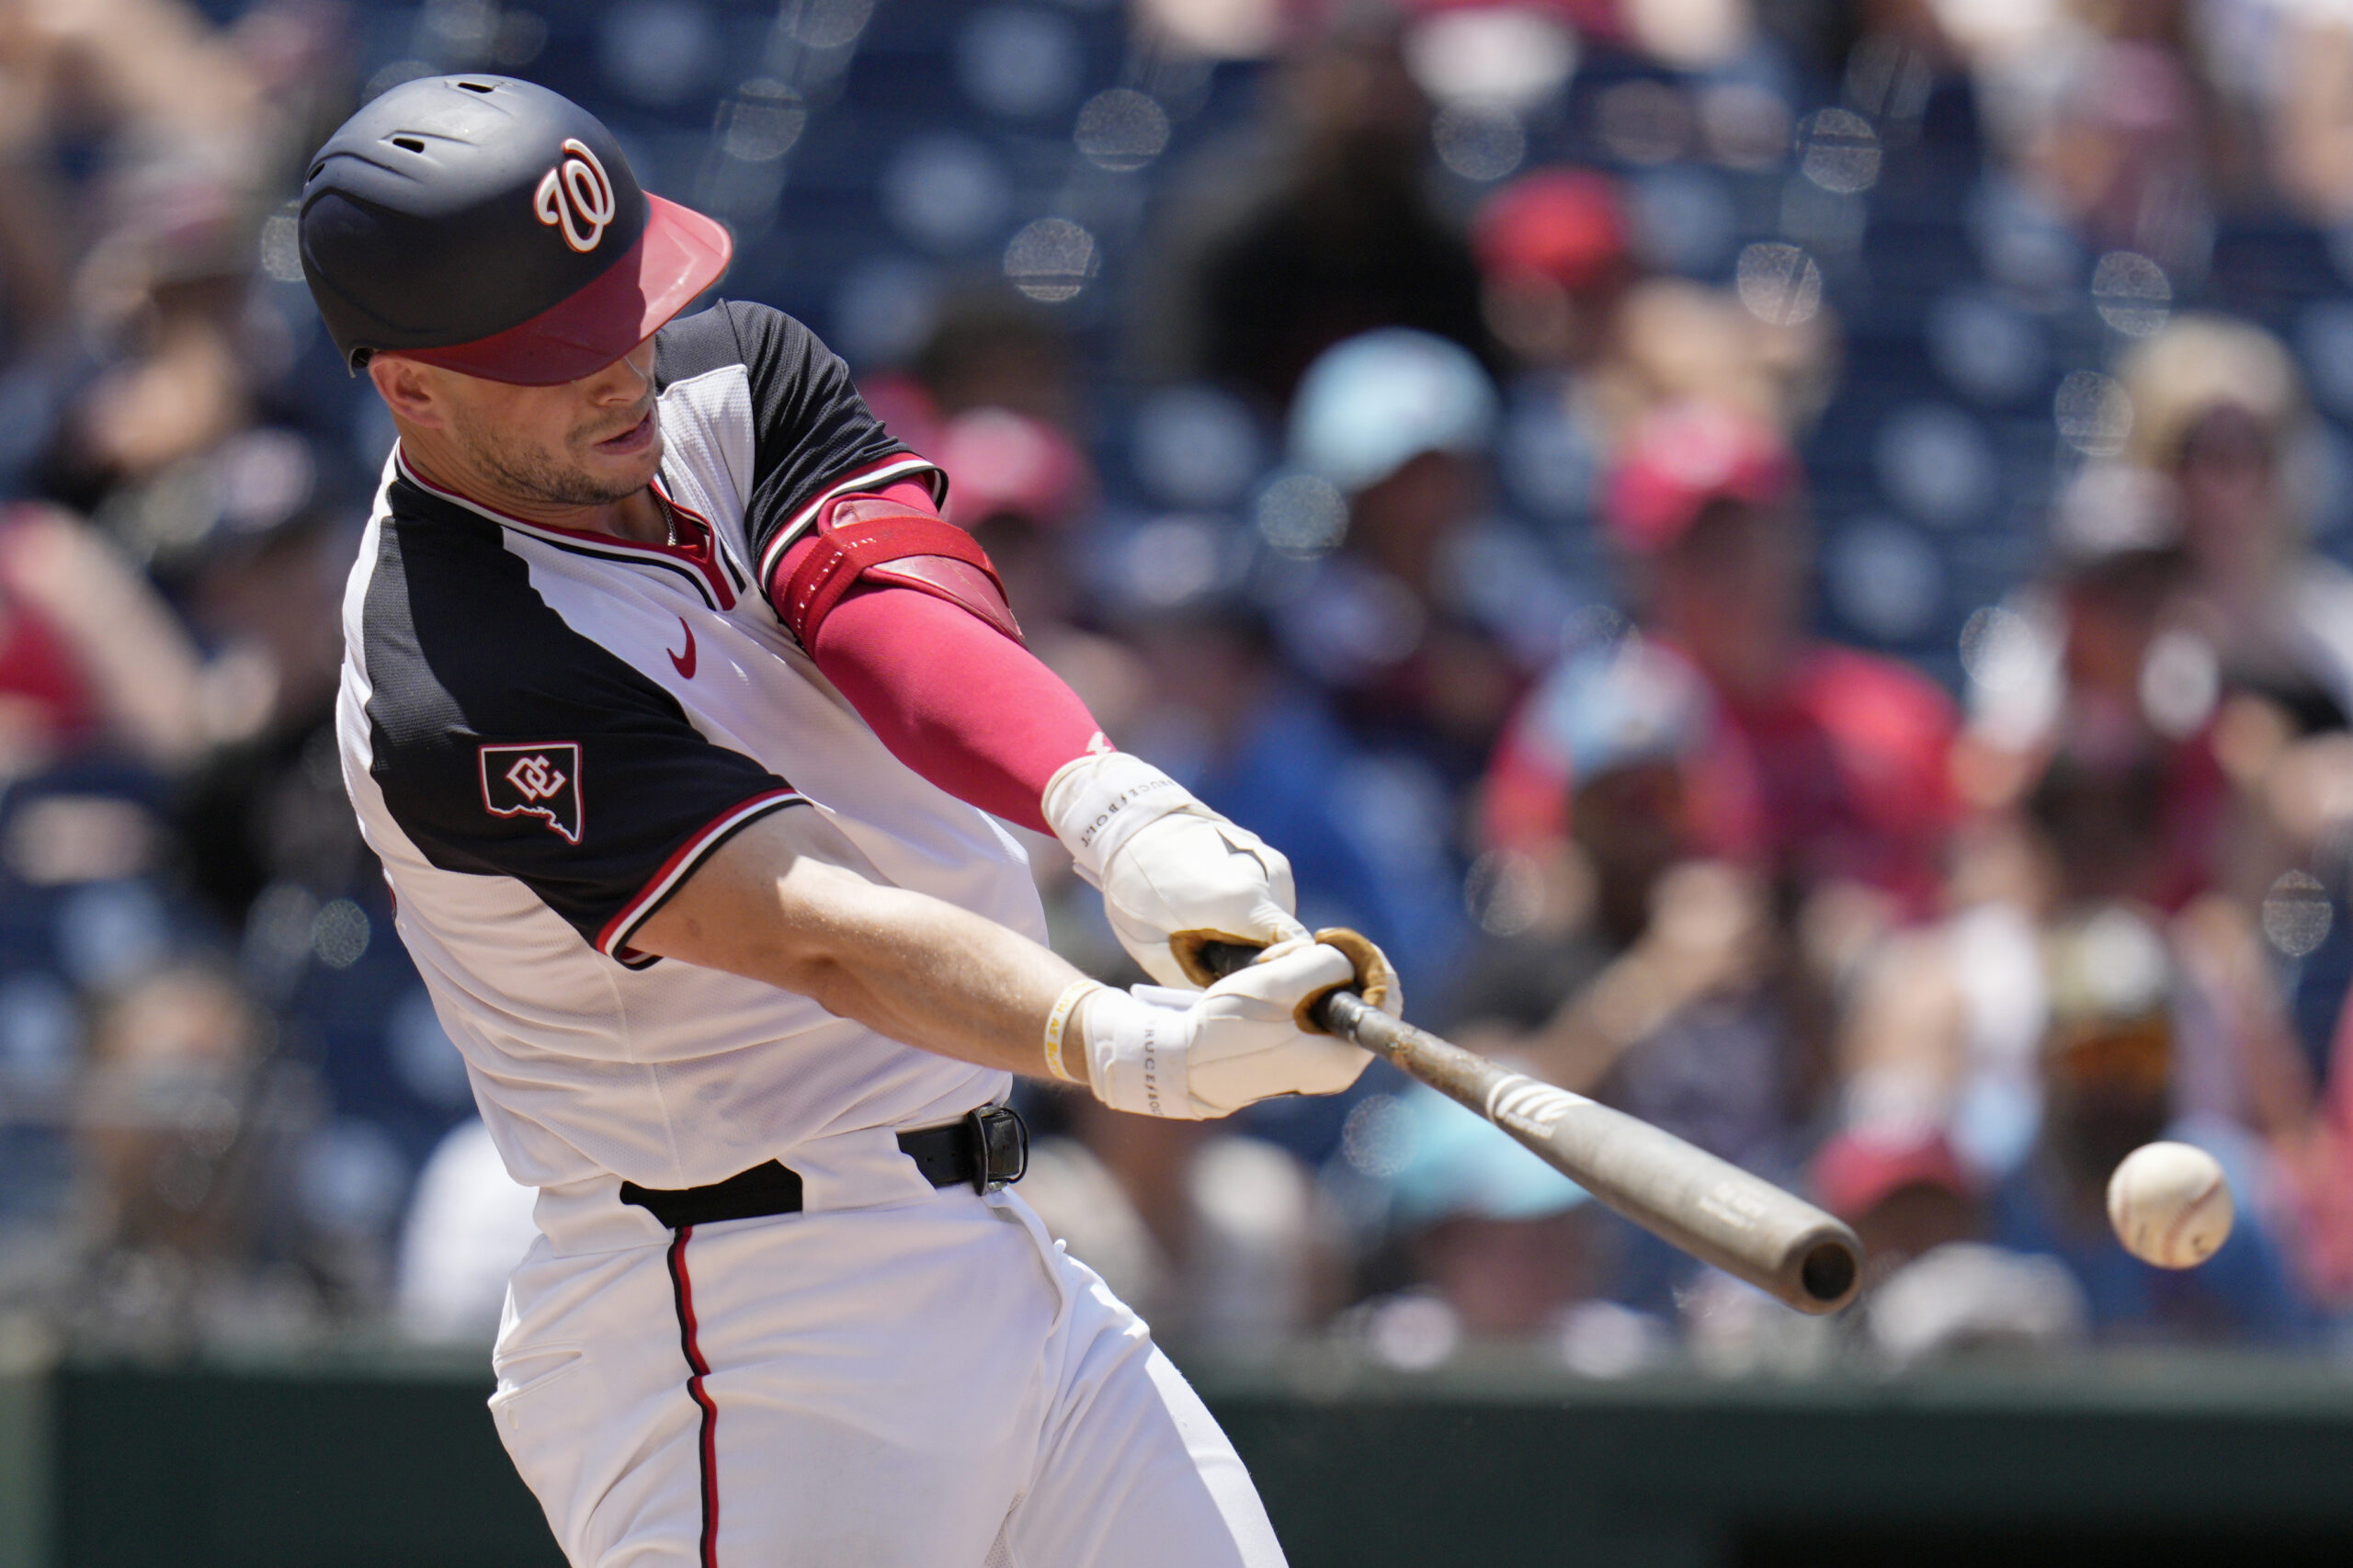 WASHINGTON, DC - JULY 07: Riley Adams #15 of the Washington Nationals hits an RBI single against the St. Louis Cardinals during the second inning at Nationals Park on July 07, 2024 in Washington, DC. (Photo by Jess Rapfogel/Getty Images)